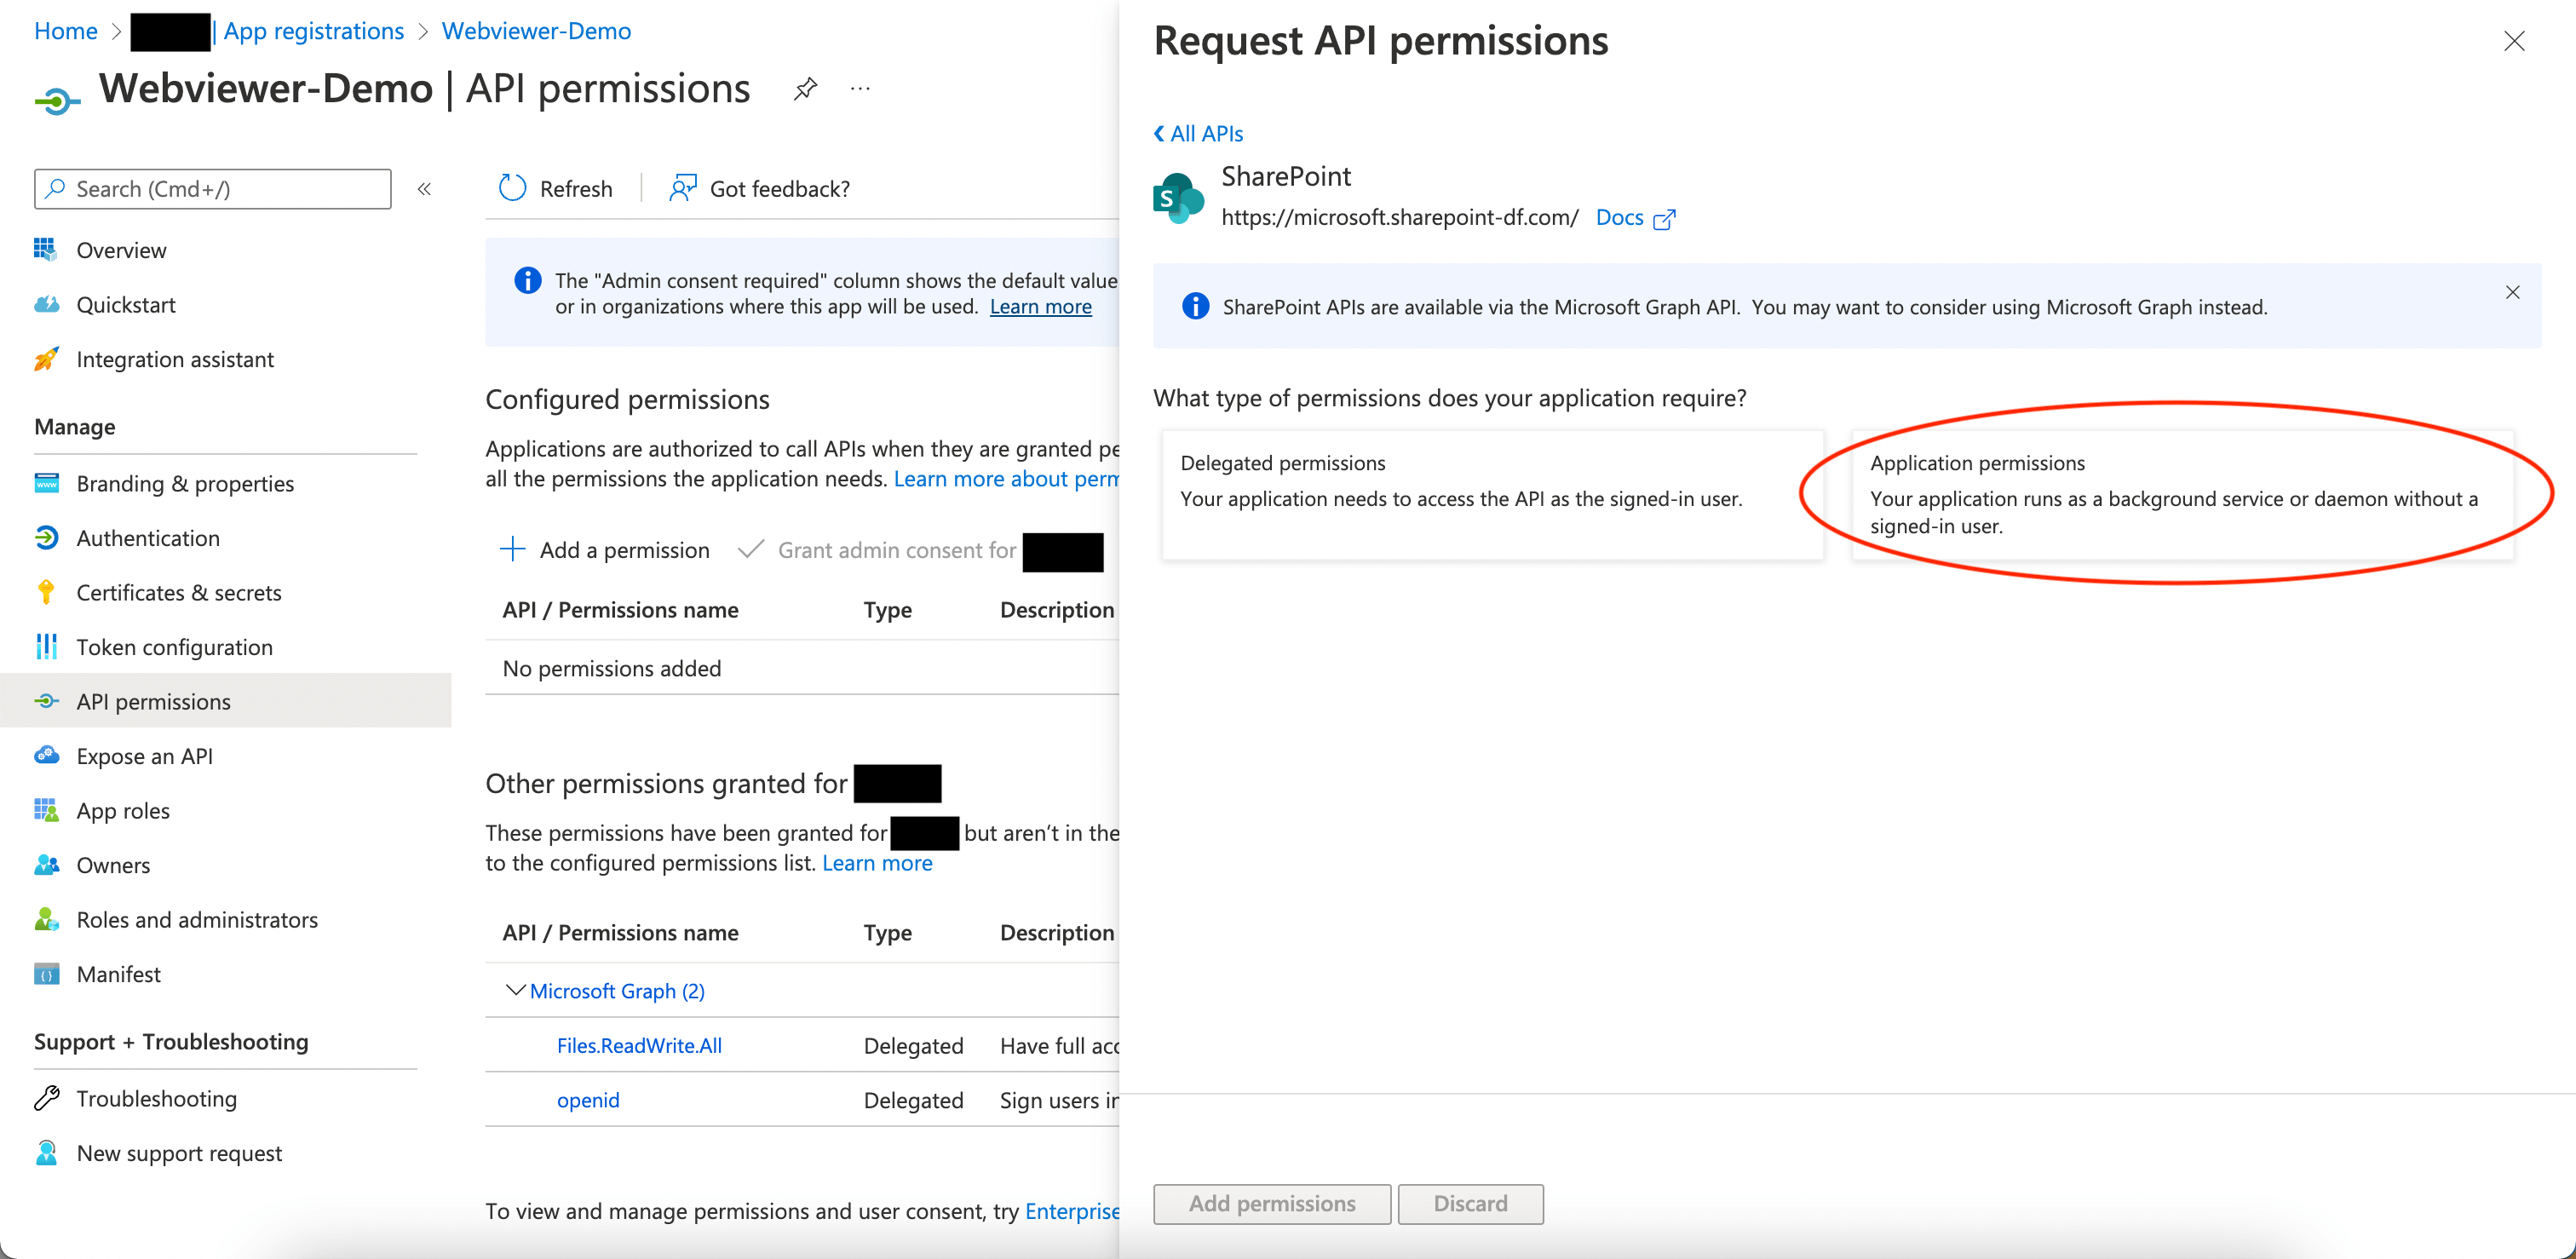 Select Application permissions